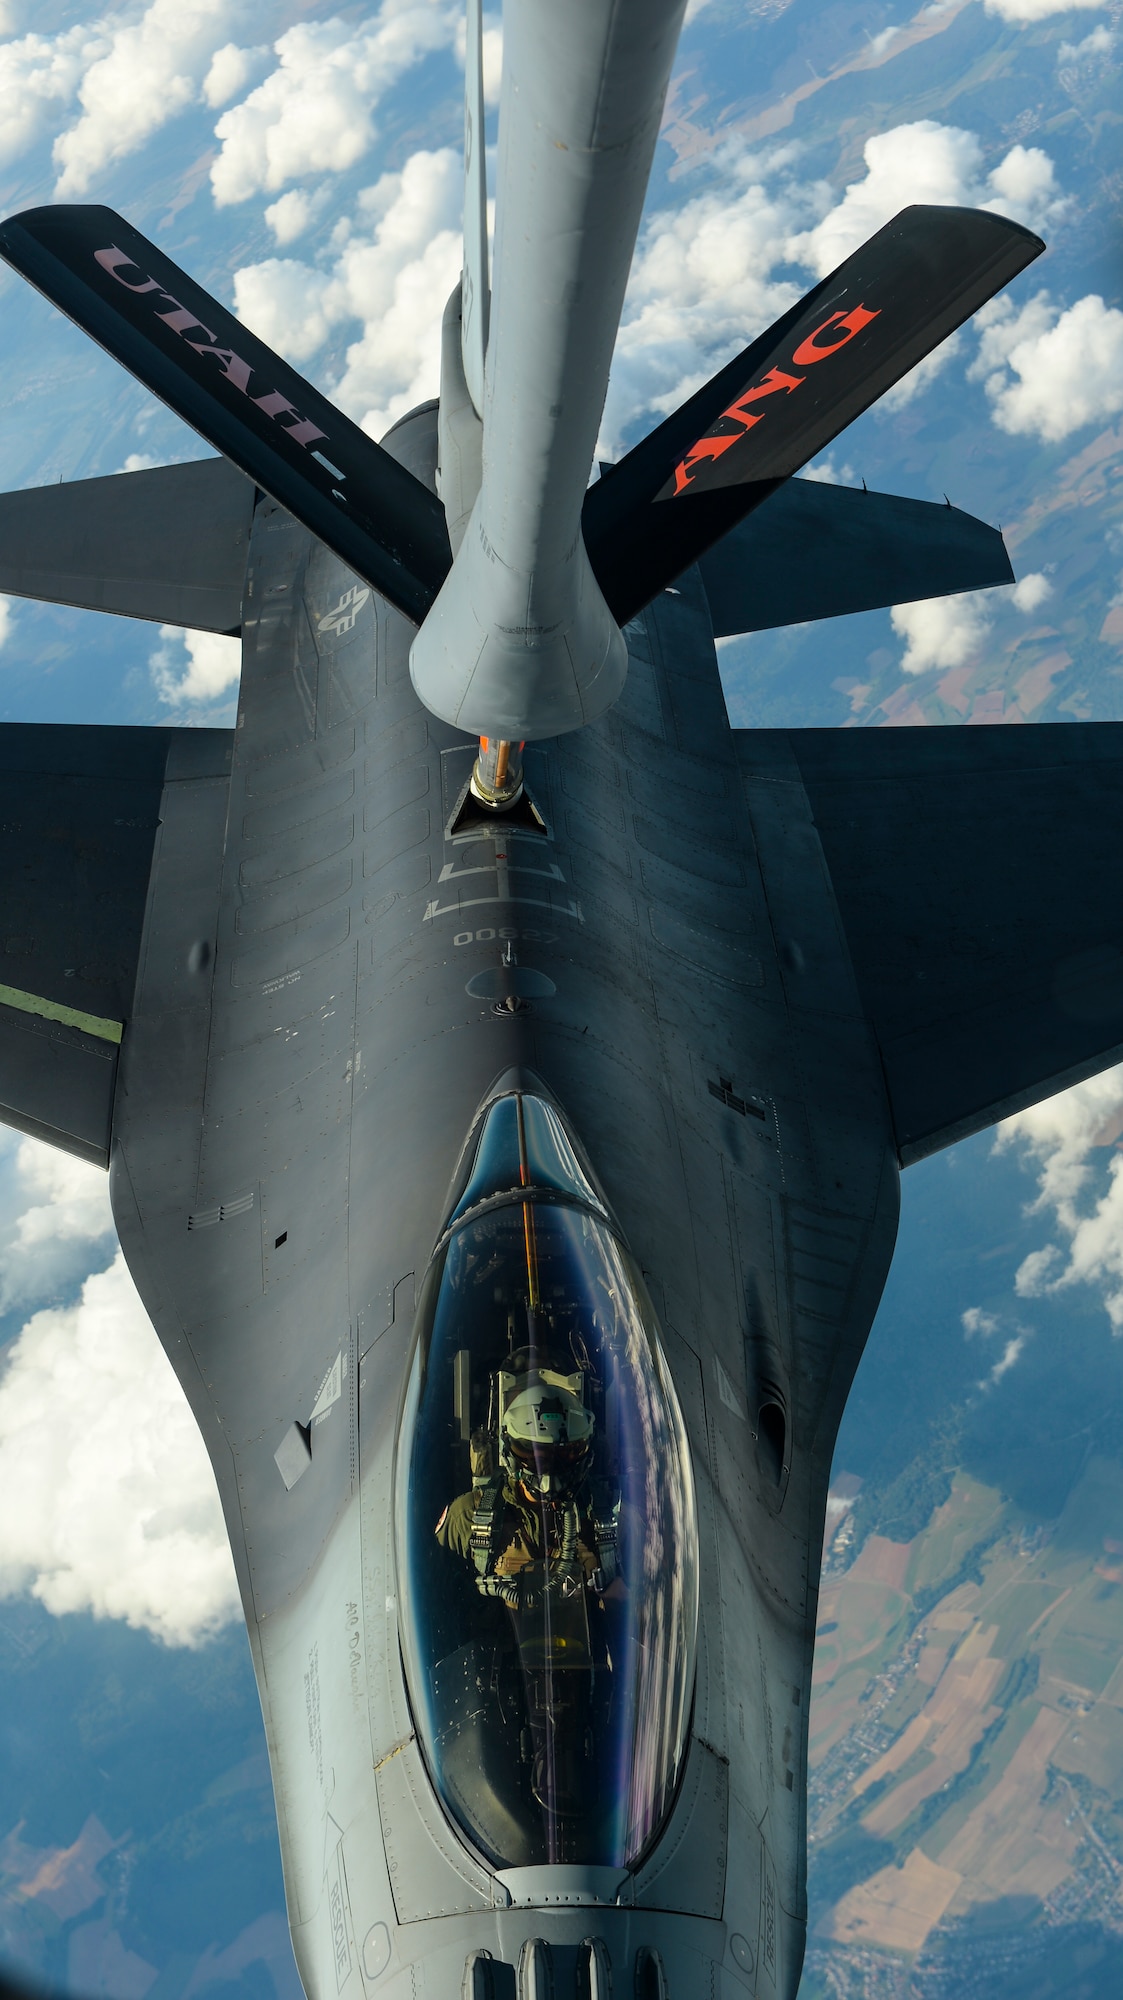 A U.S. Air Force F-16 Fighting Falcon, assigned to the 52nd Fighter Wing, Spangdahlem Air Base, Germany, receives fuel from a KC-135 Stratotanker from the 191st Air Refueling Squadron, Roland R. Wright Air National Guard Base, Utah, over Ramstein Air Base, Sept. 27, 2016. The 191st ARS ANG unit conducted the aerial refueling during a routine training sortie. (U.S. Air Force photo/Senior Airman Dawn M. Weber)